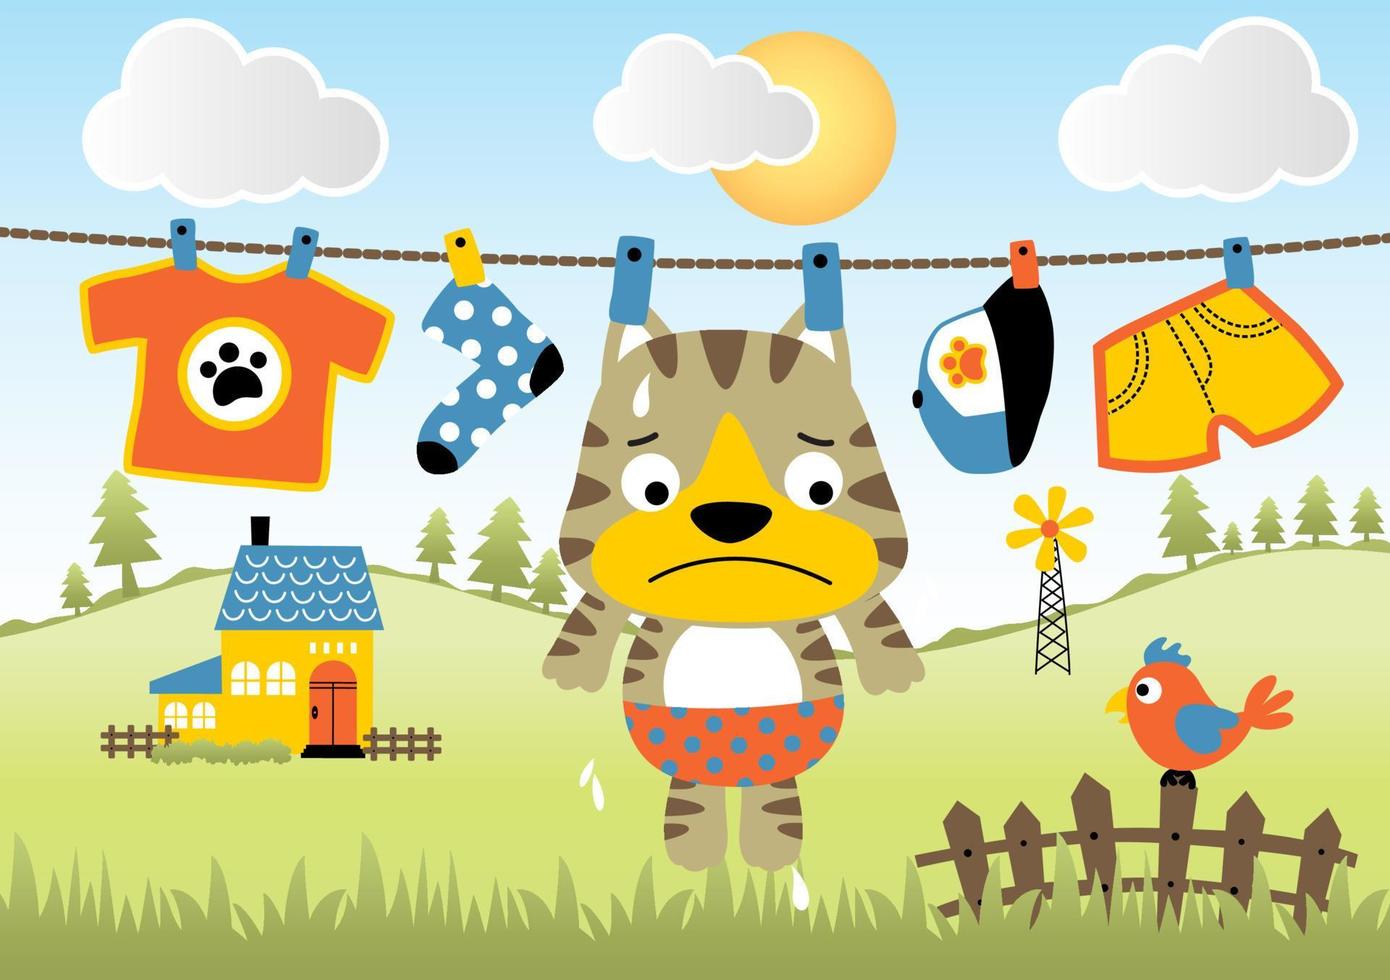 Cute kitten with clothes hanging in clothesline on rural scene background, bird on fence, vector cartoon illustration